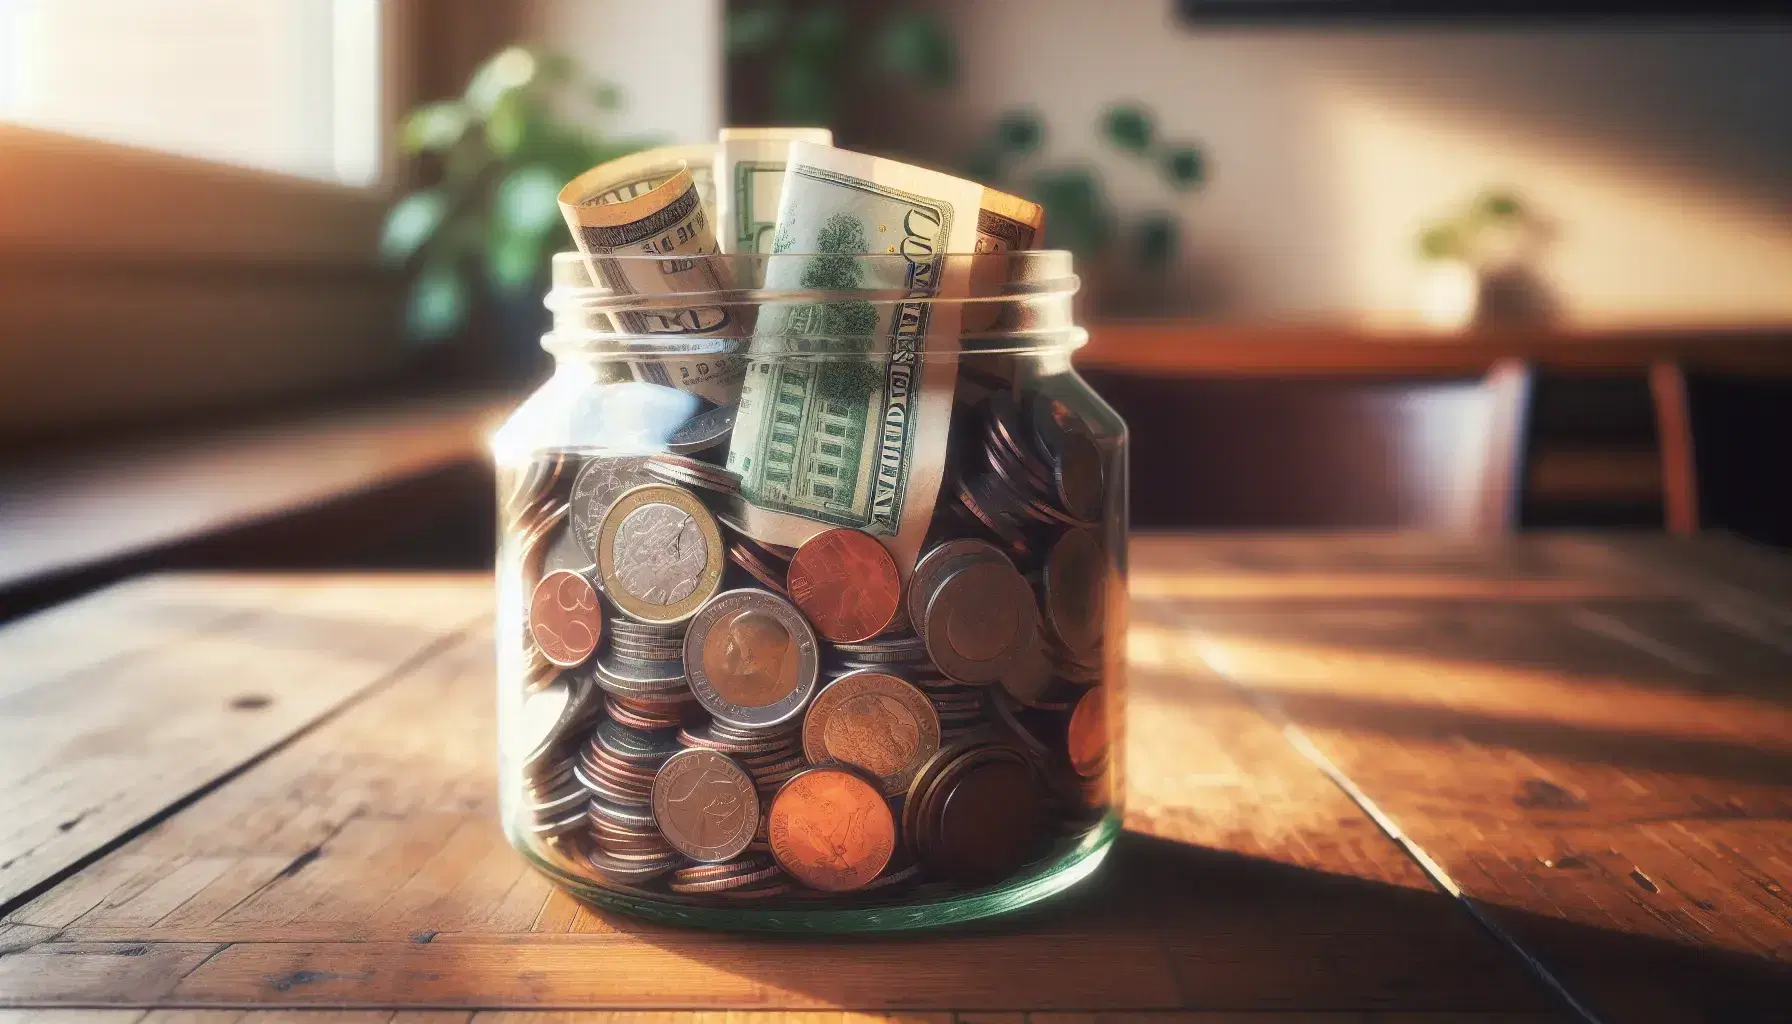 Glass jar filled with mixed coins and rolled paper currency on a wooden table, with a softly blurred green background.